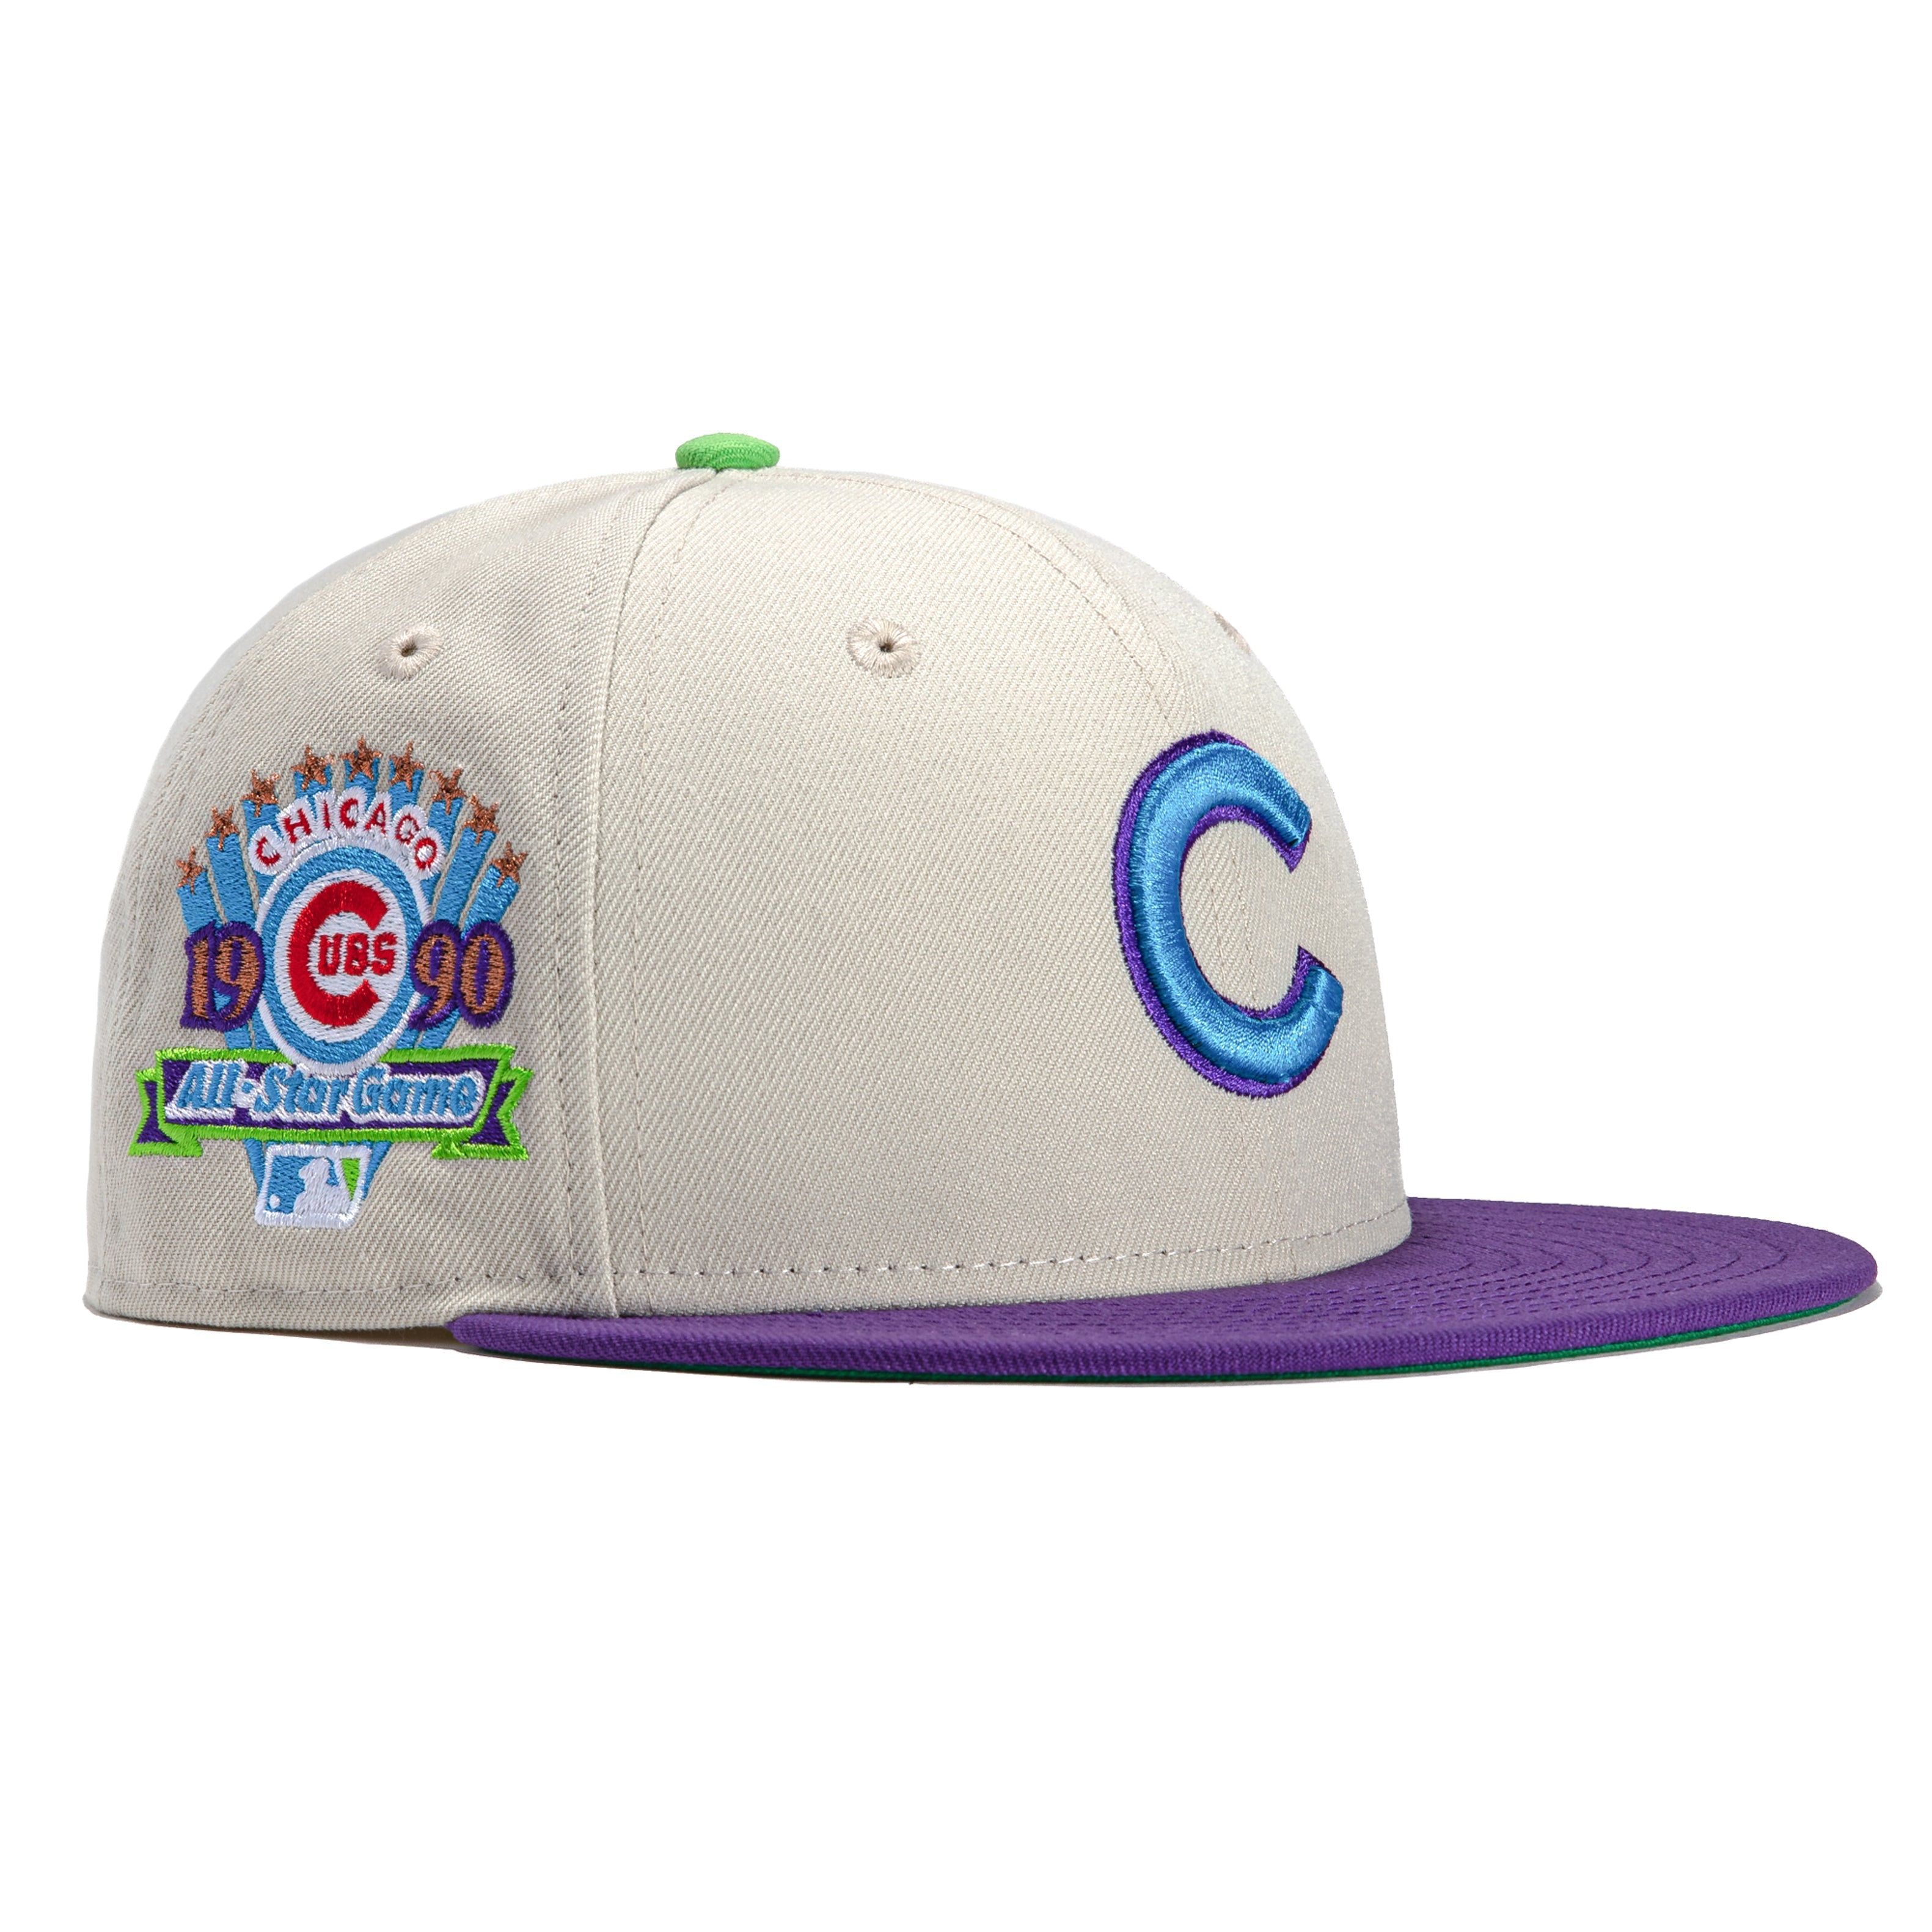 Cereal Pack Bonus Fitted Hats